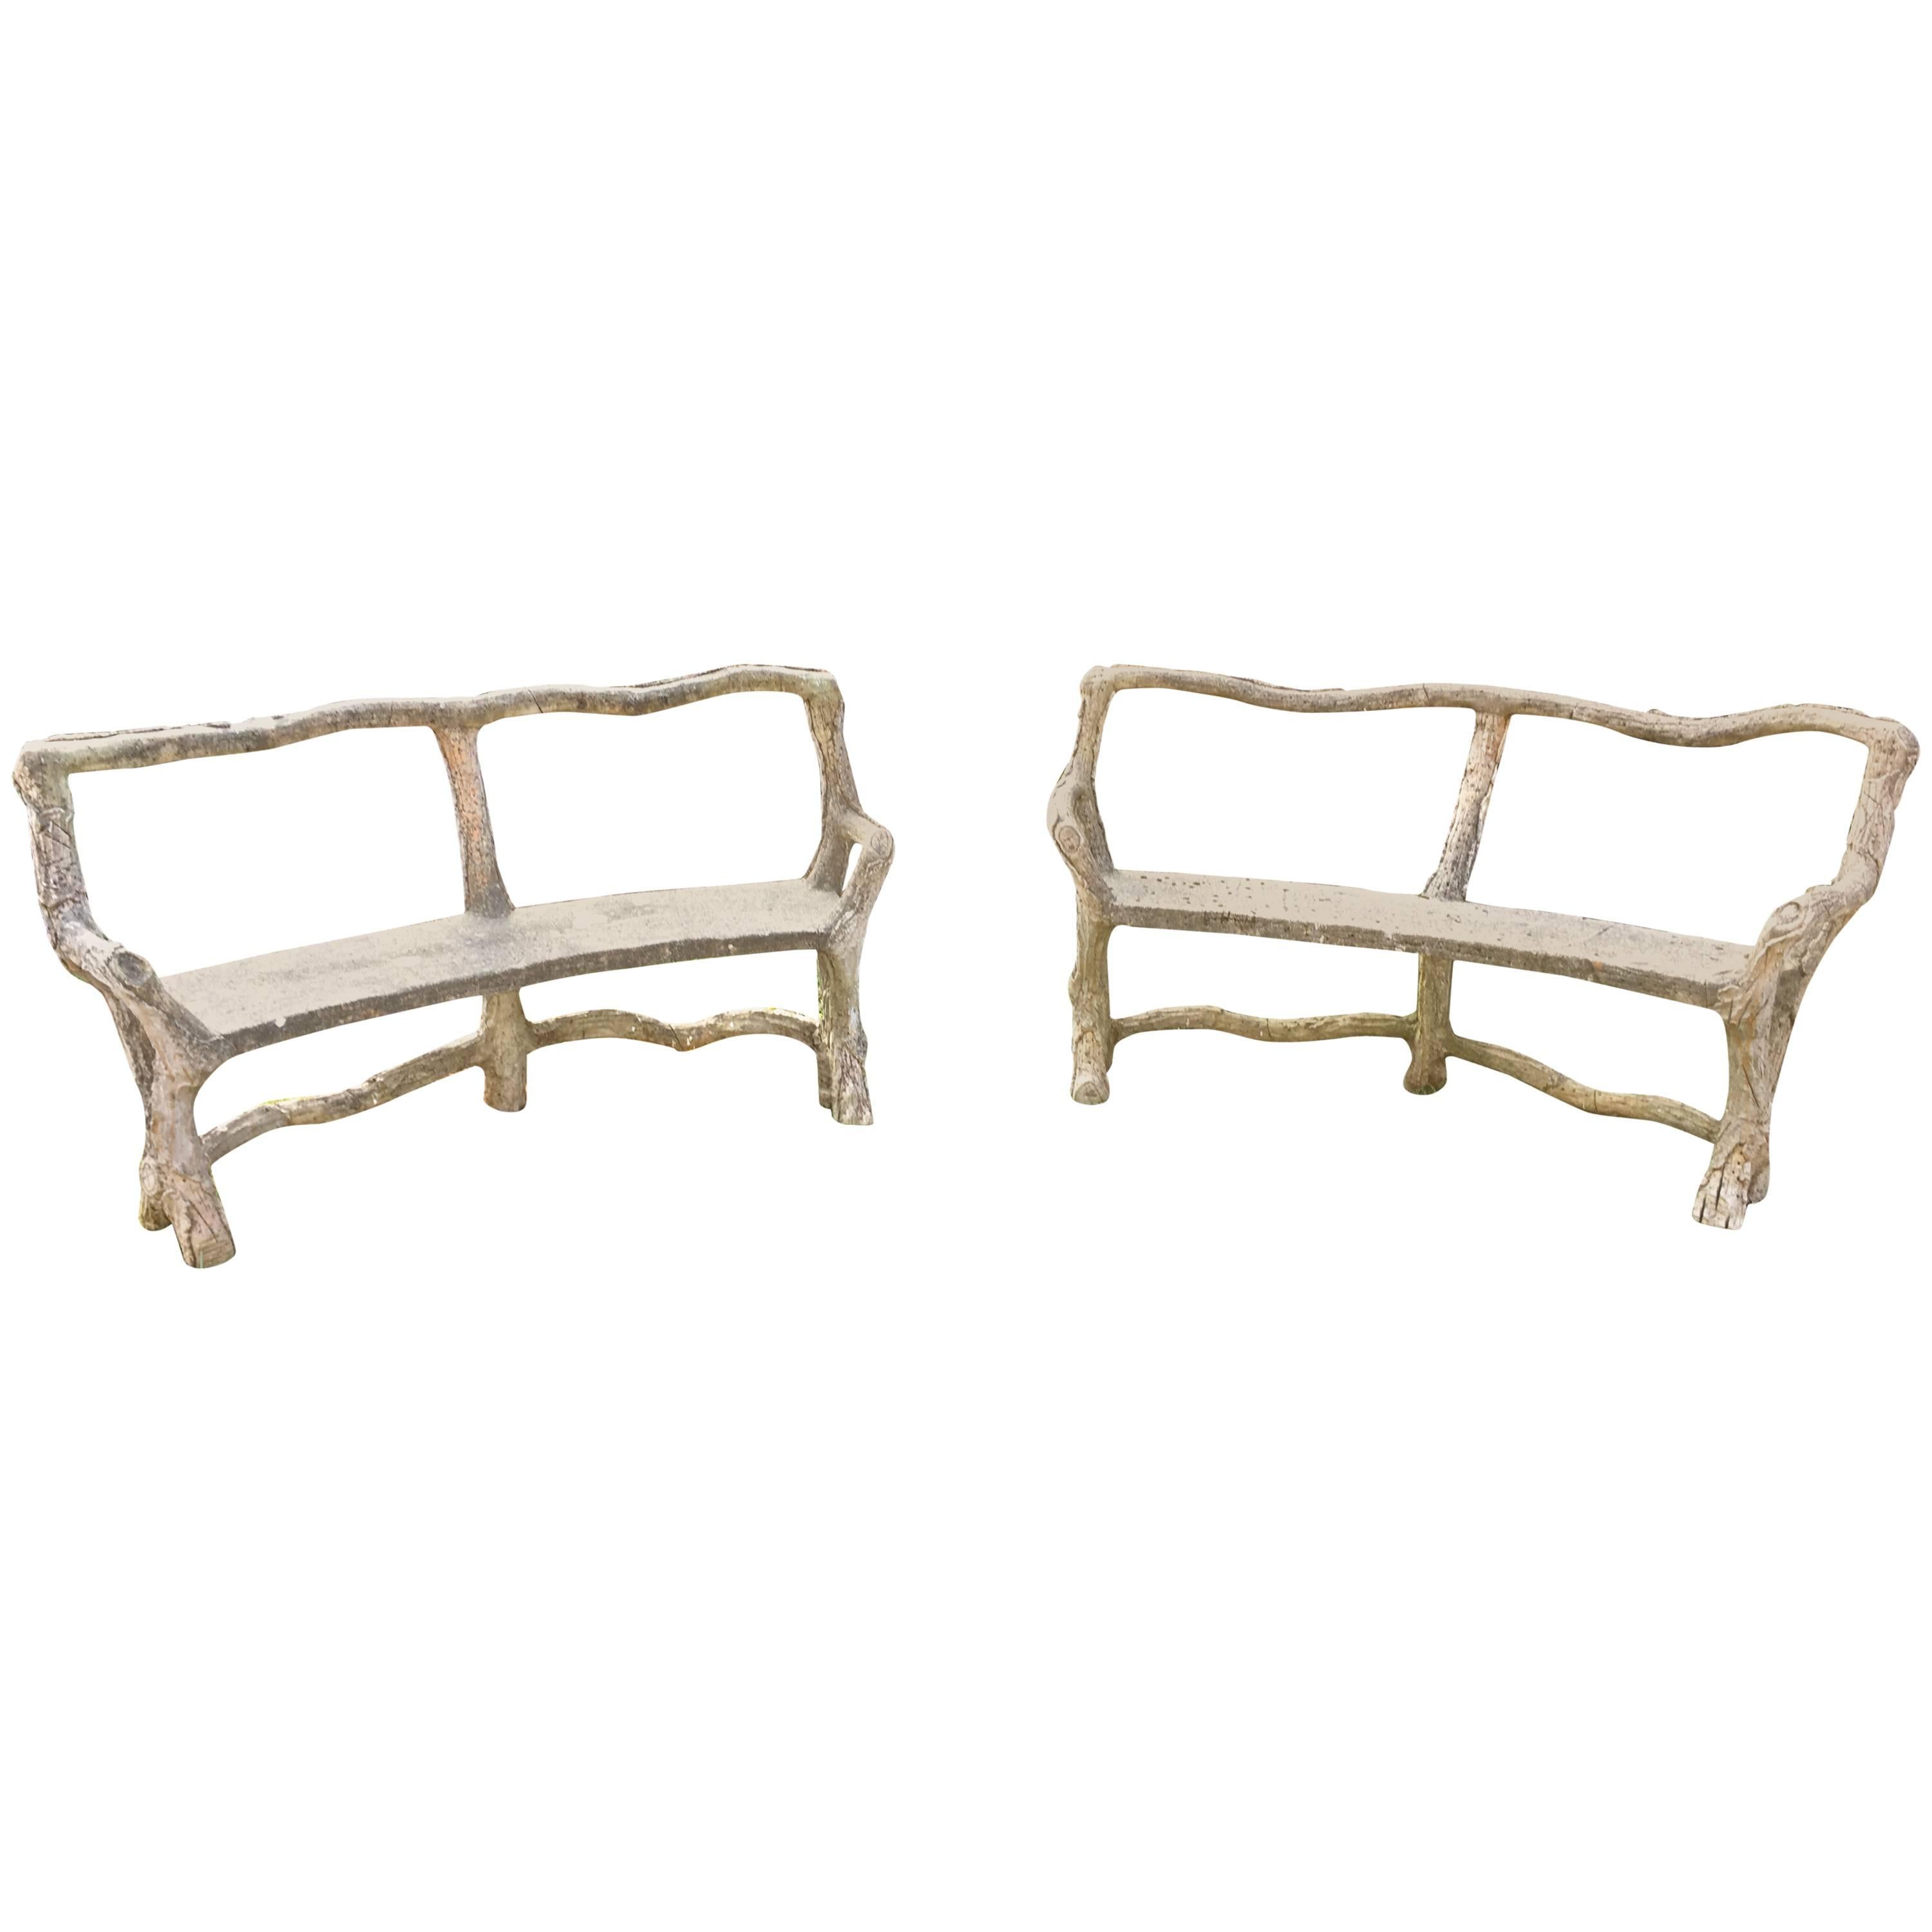 Pair of Stunning Curved French Faux Bois Benches